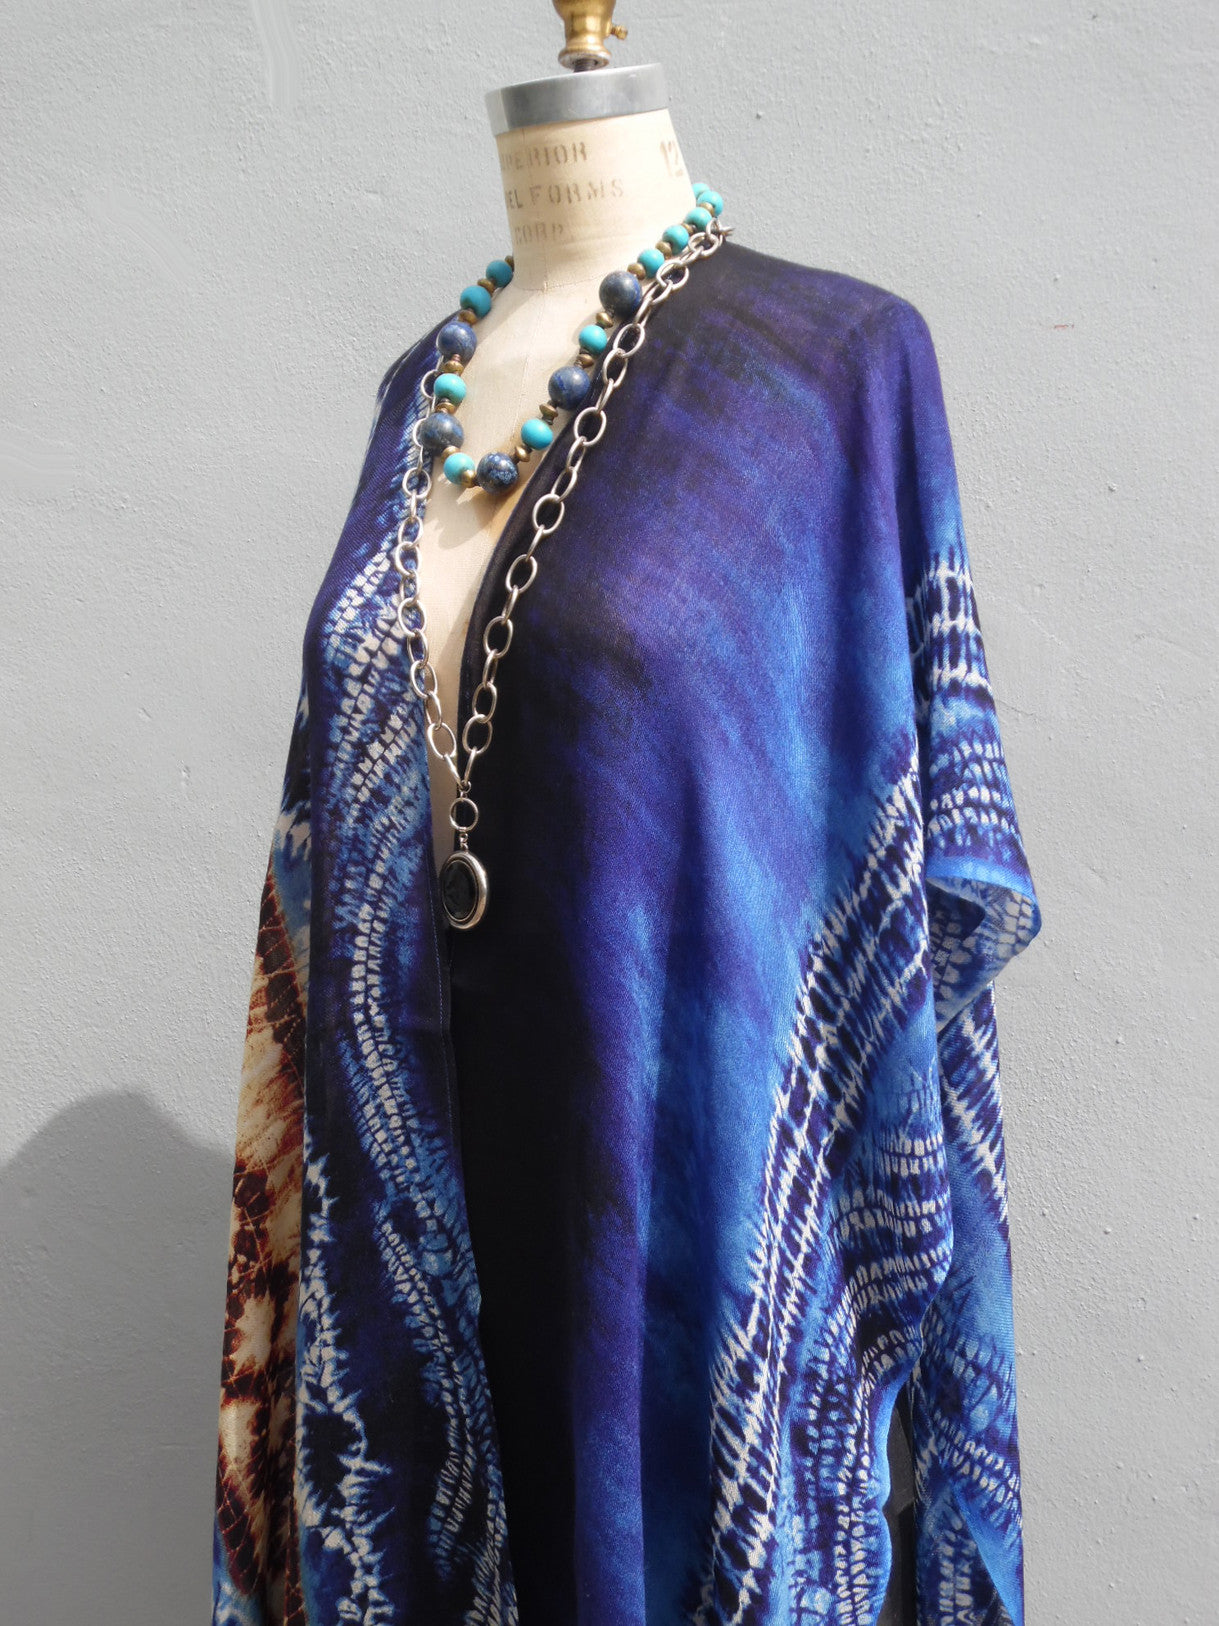 Cape Shawl Silk And Cashmere Navy And Brown Batik